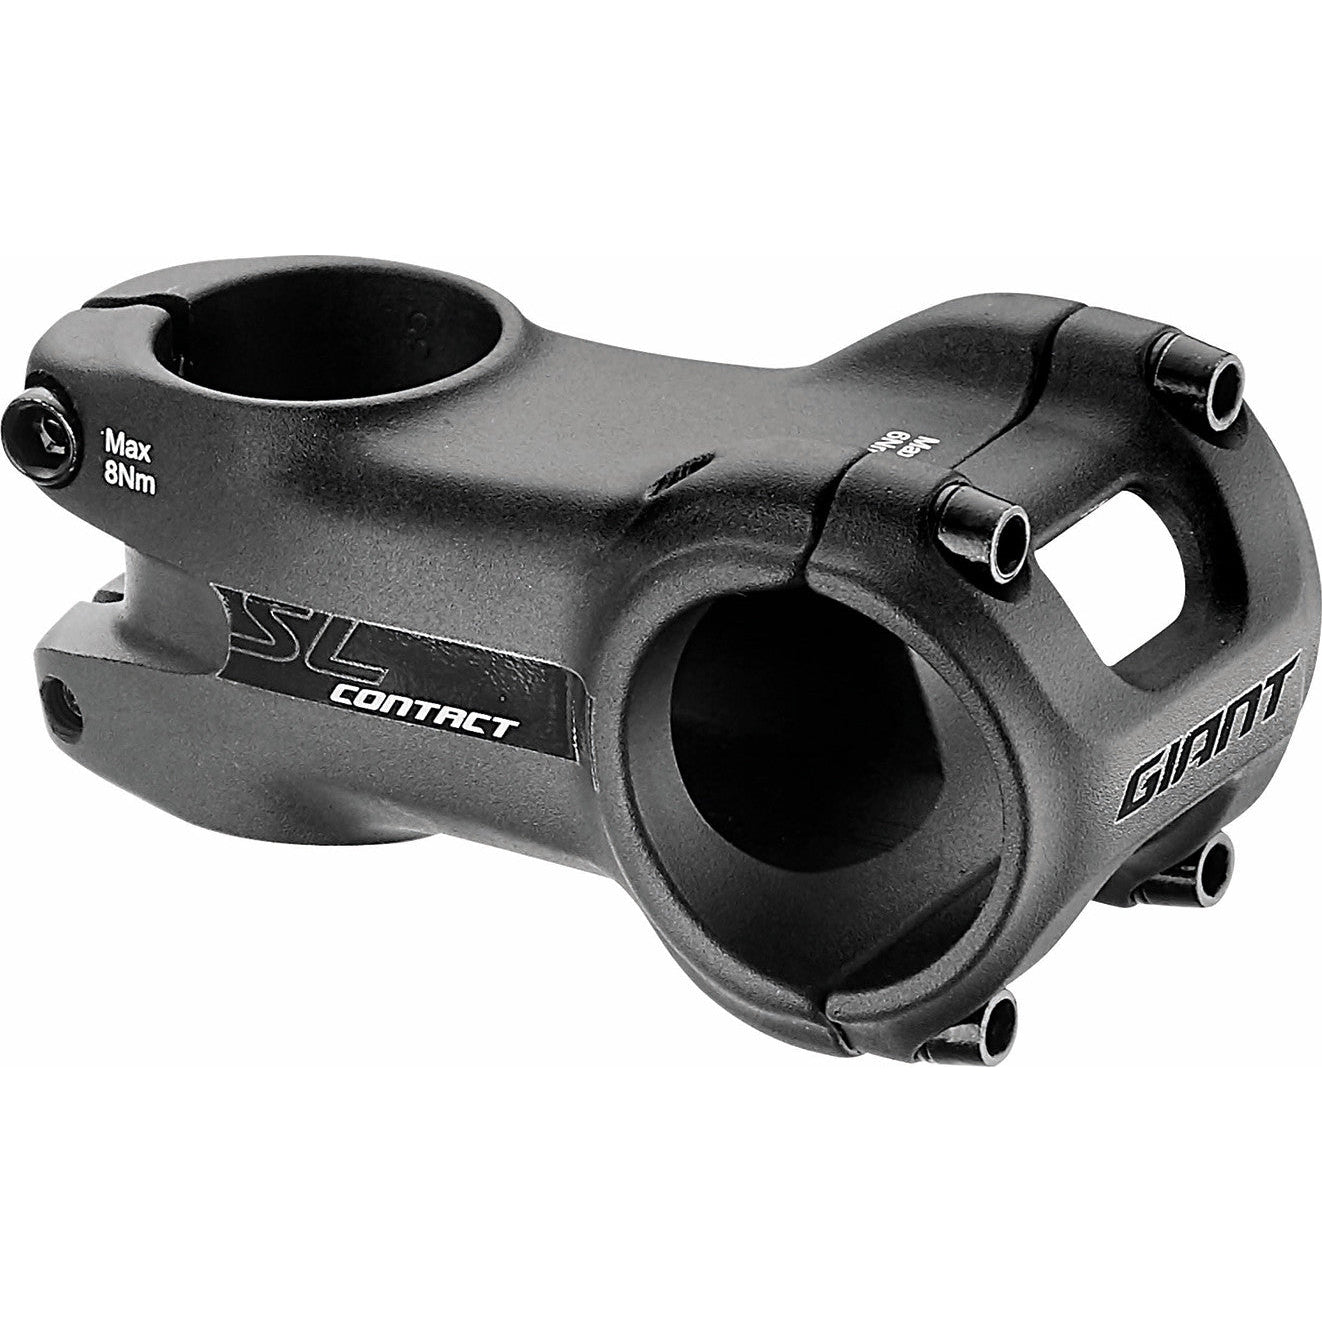 Giant Contact SL 35mm Threadless Bike Stem - Stems - Bicycle Warehouse